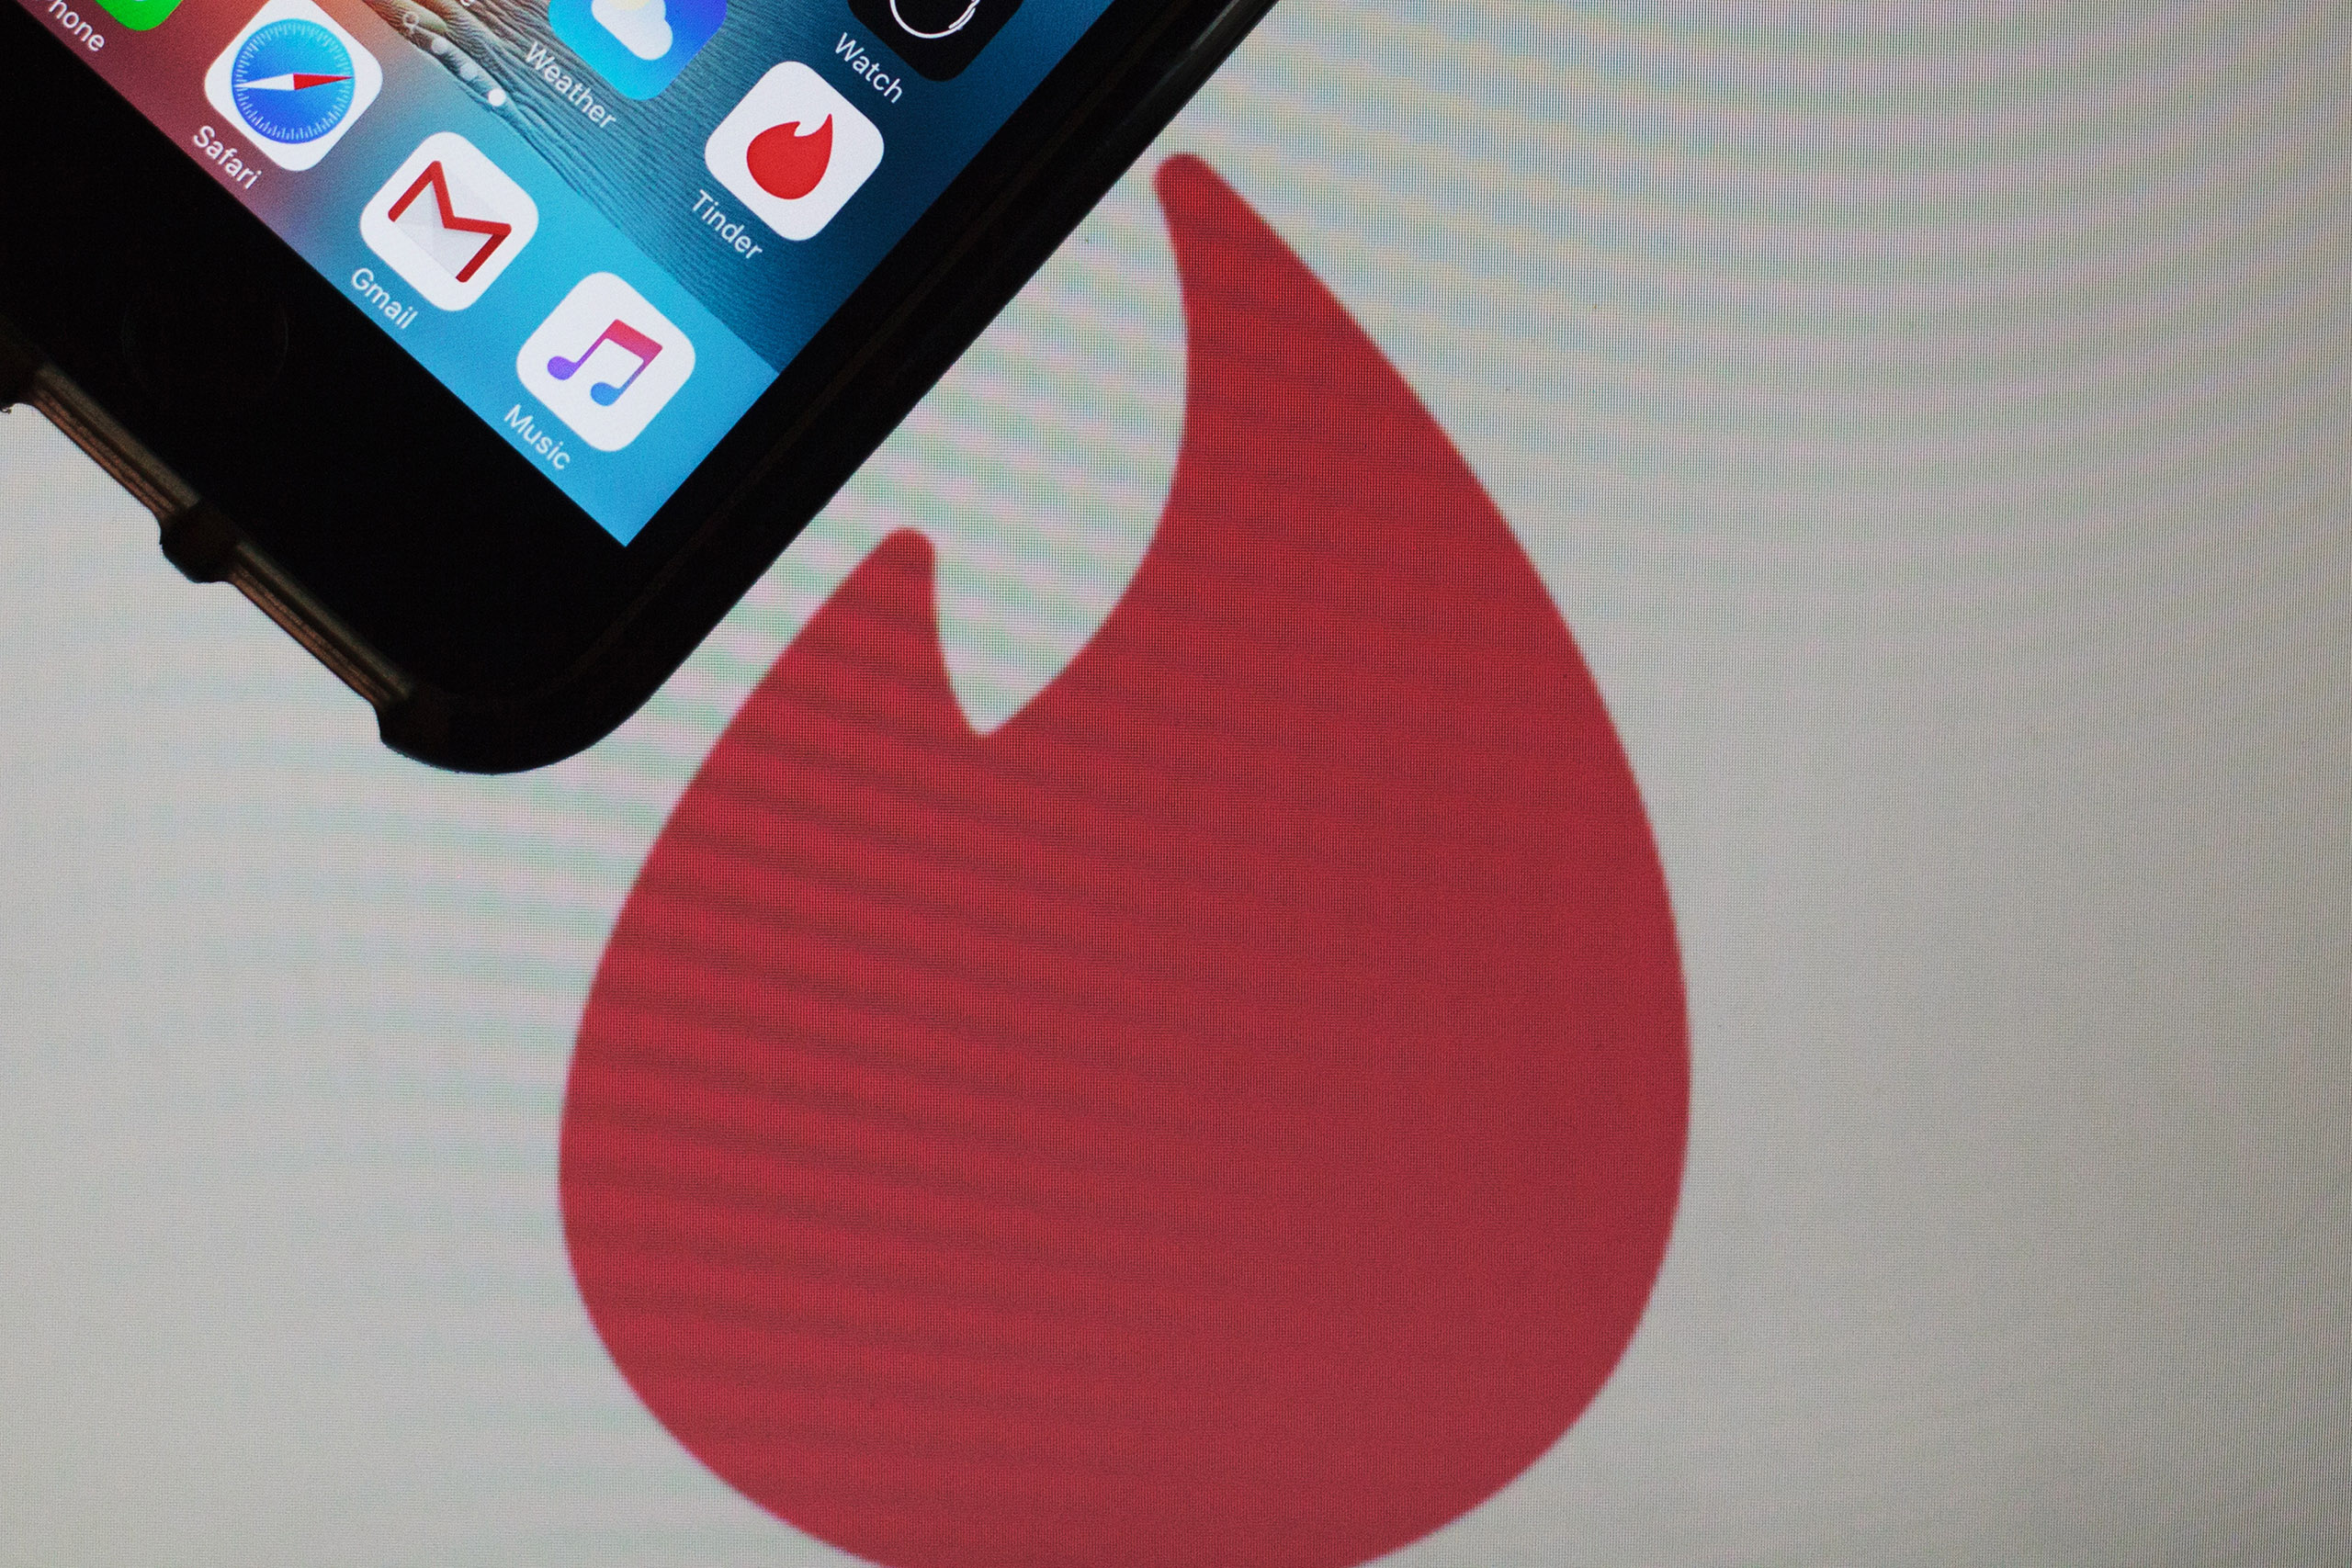 The Tinder Inc. application icon is displayed on a smartphone in New Delhi, India, on July 29, 2016. (Sara Hylton—Bloomberg/Getty Images)